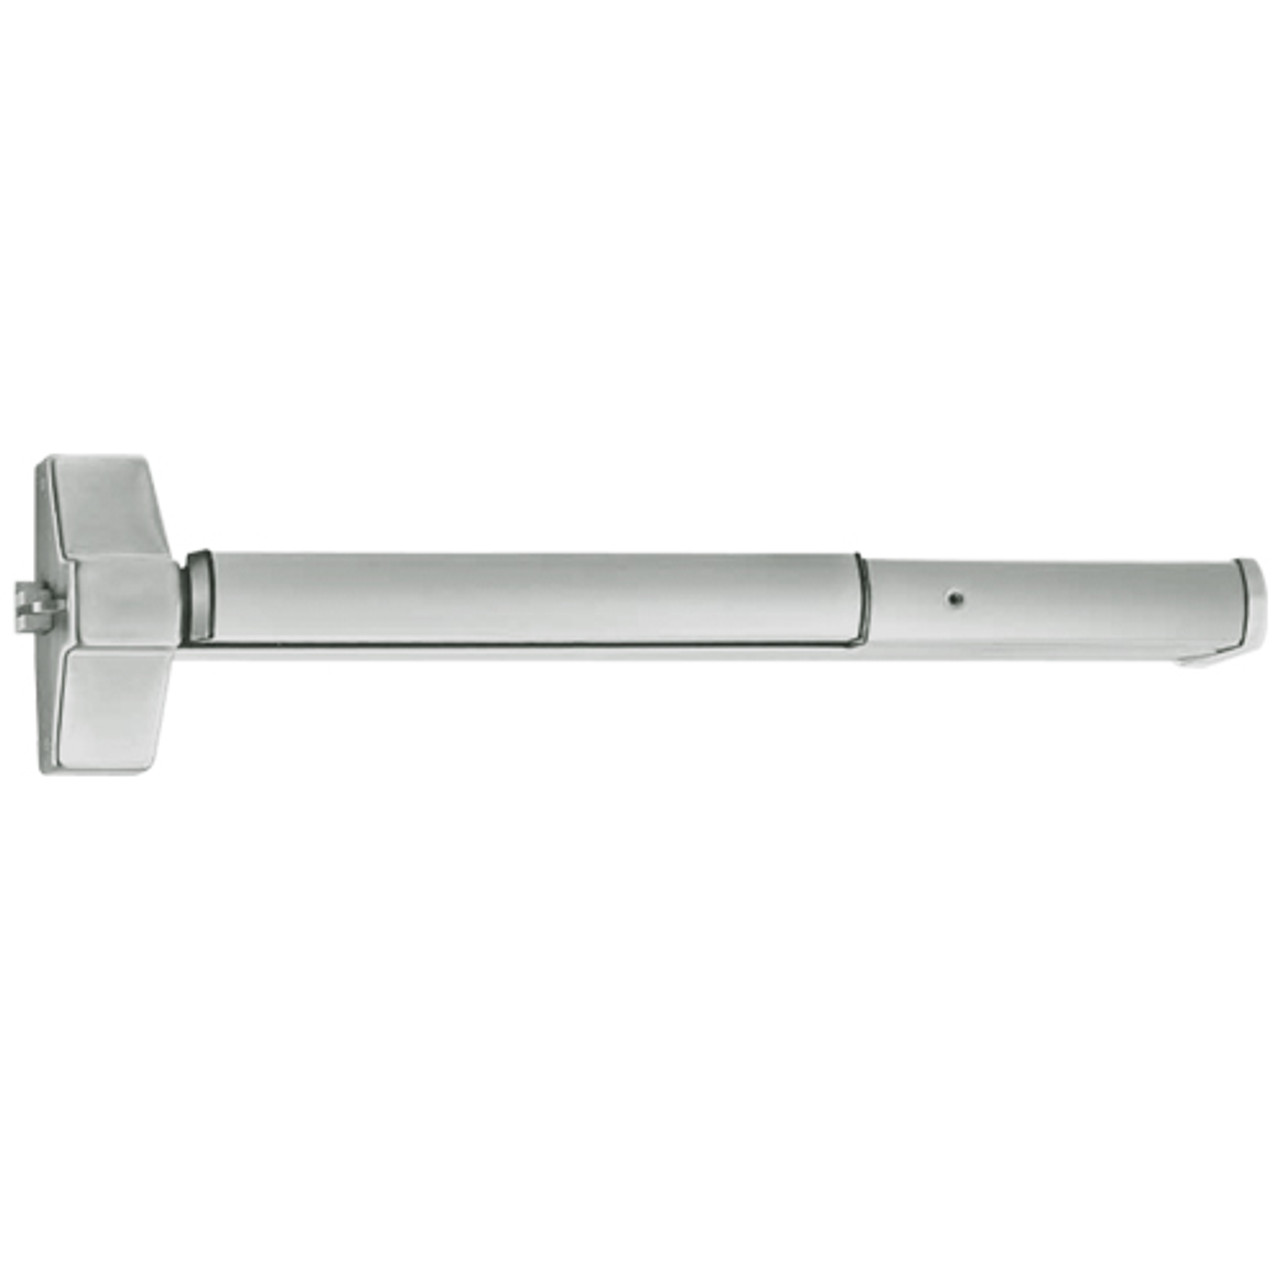 ED5200S-619-W048-M52 Corbin ED5200 Series Non Fire Rated Exit Device with Cylinder Dogging in Satin Nickel Finish